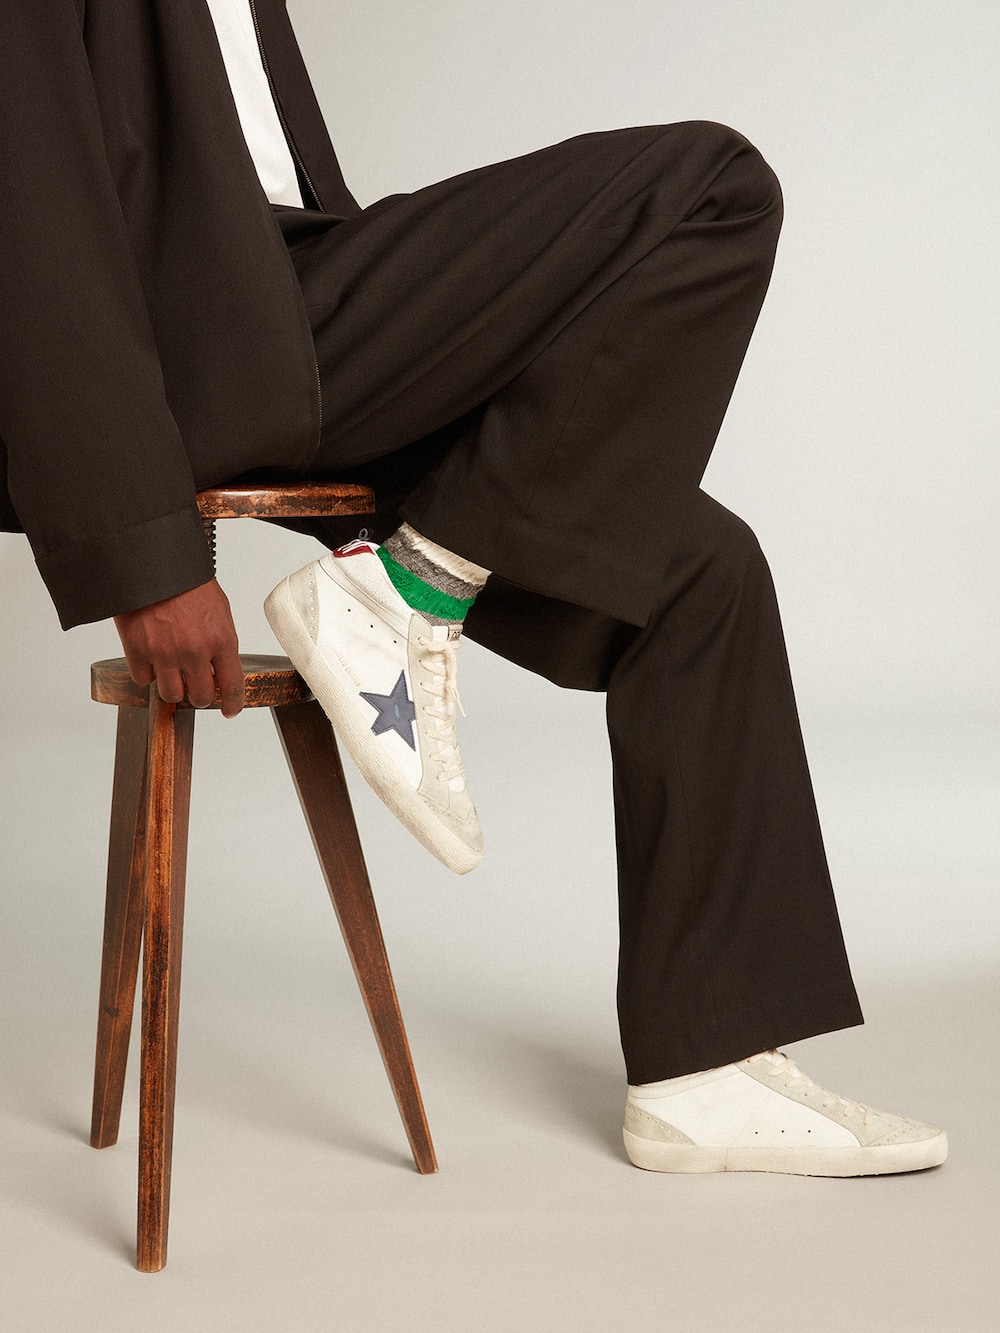 Golden Goose - Gray melange socks with distressed details and two-tone stripes in 